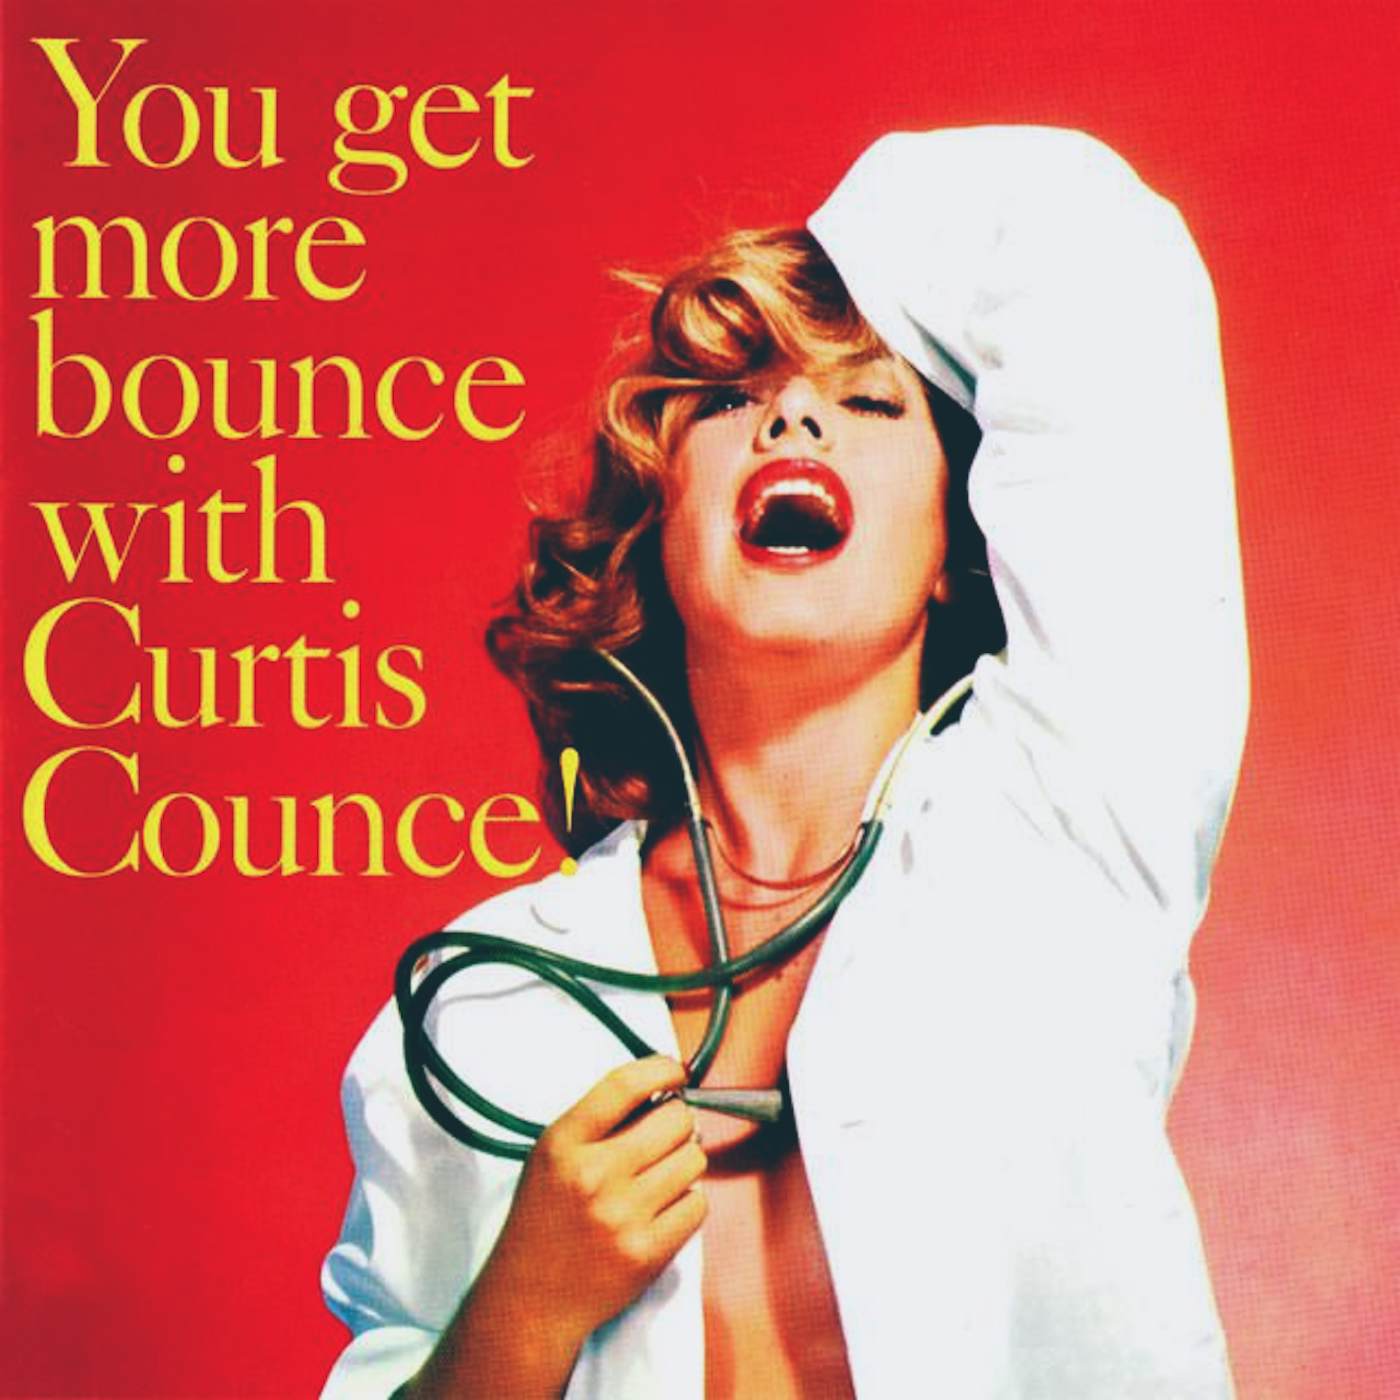 Curtis Counce